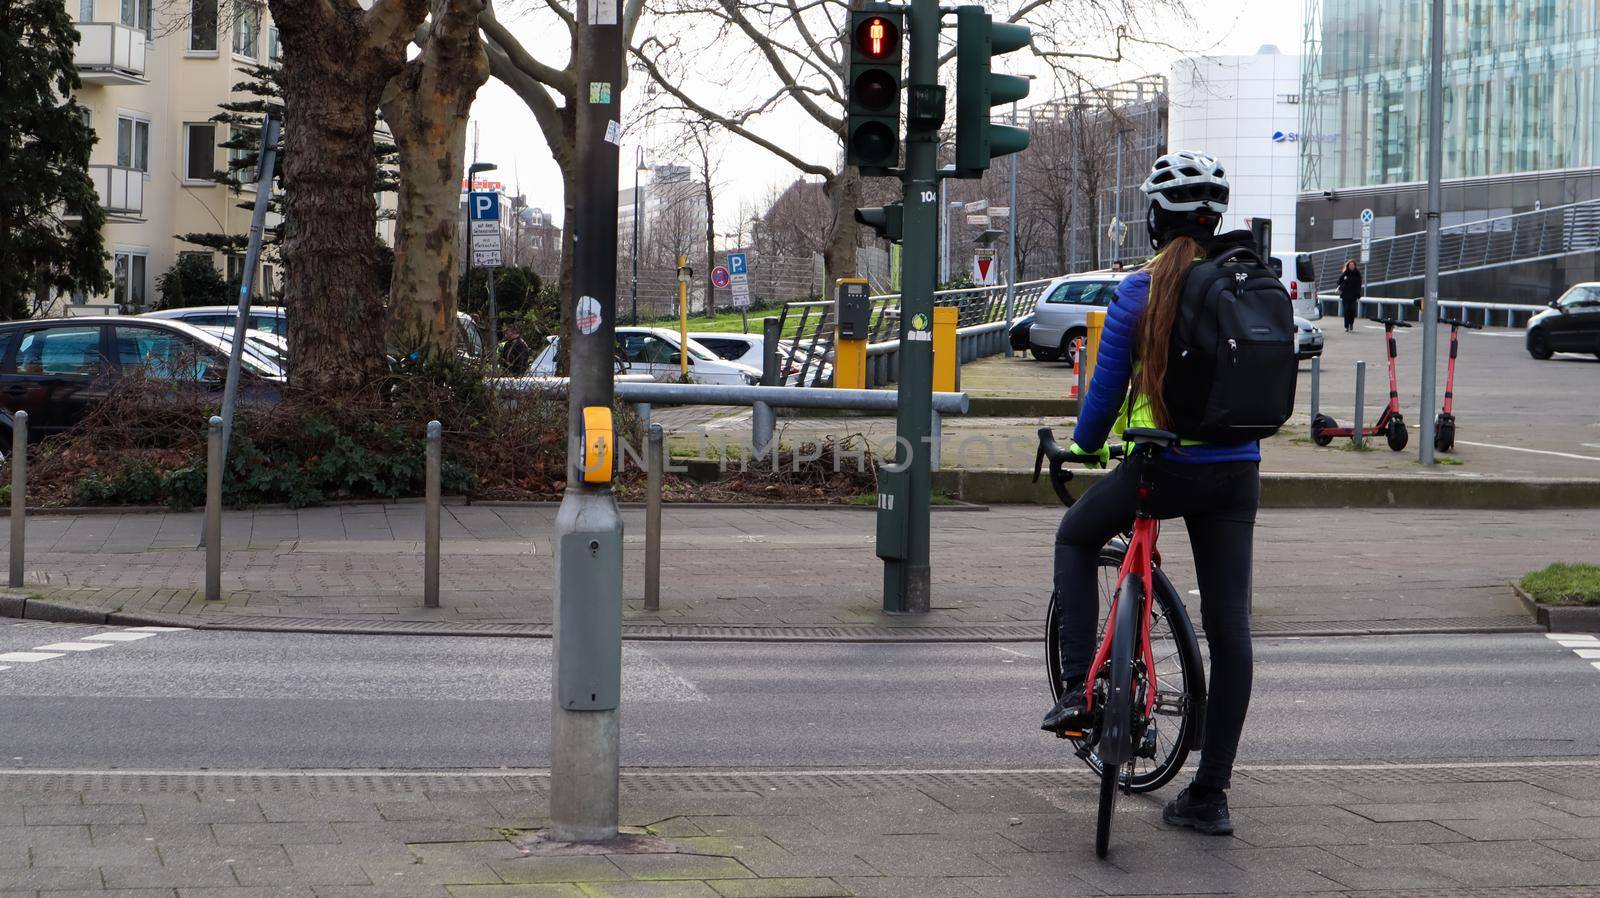 Germany, Dusseldorf - February 28, 2020: A young girl a cyclist in a helmet, stopped at a traffic light and waiting for a permission signal to cross the street. City view